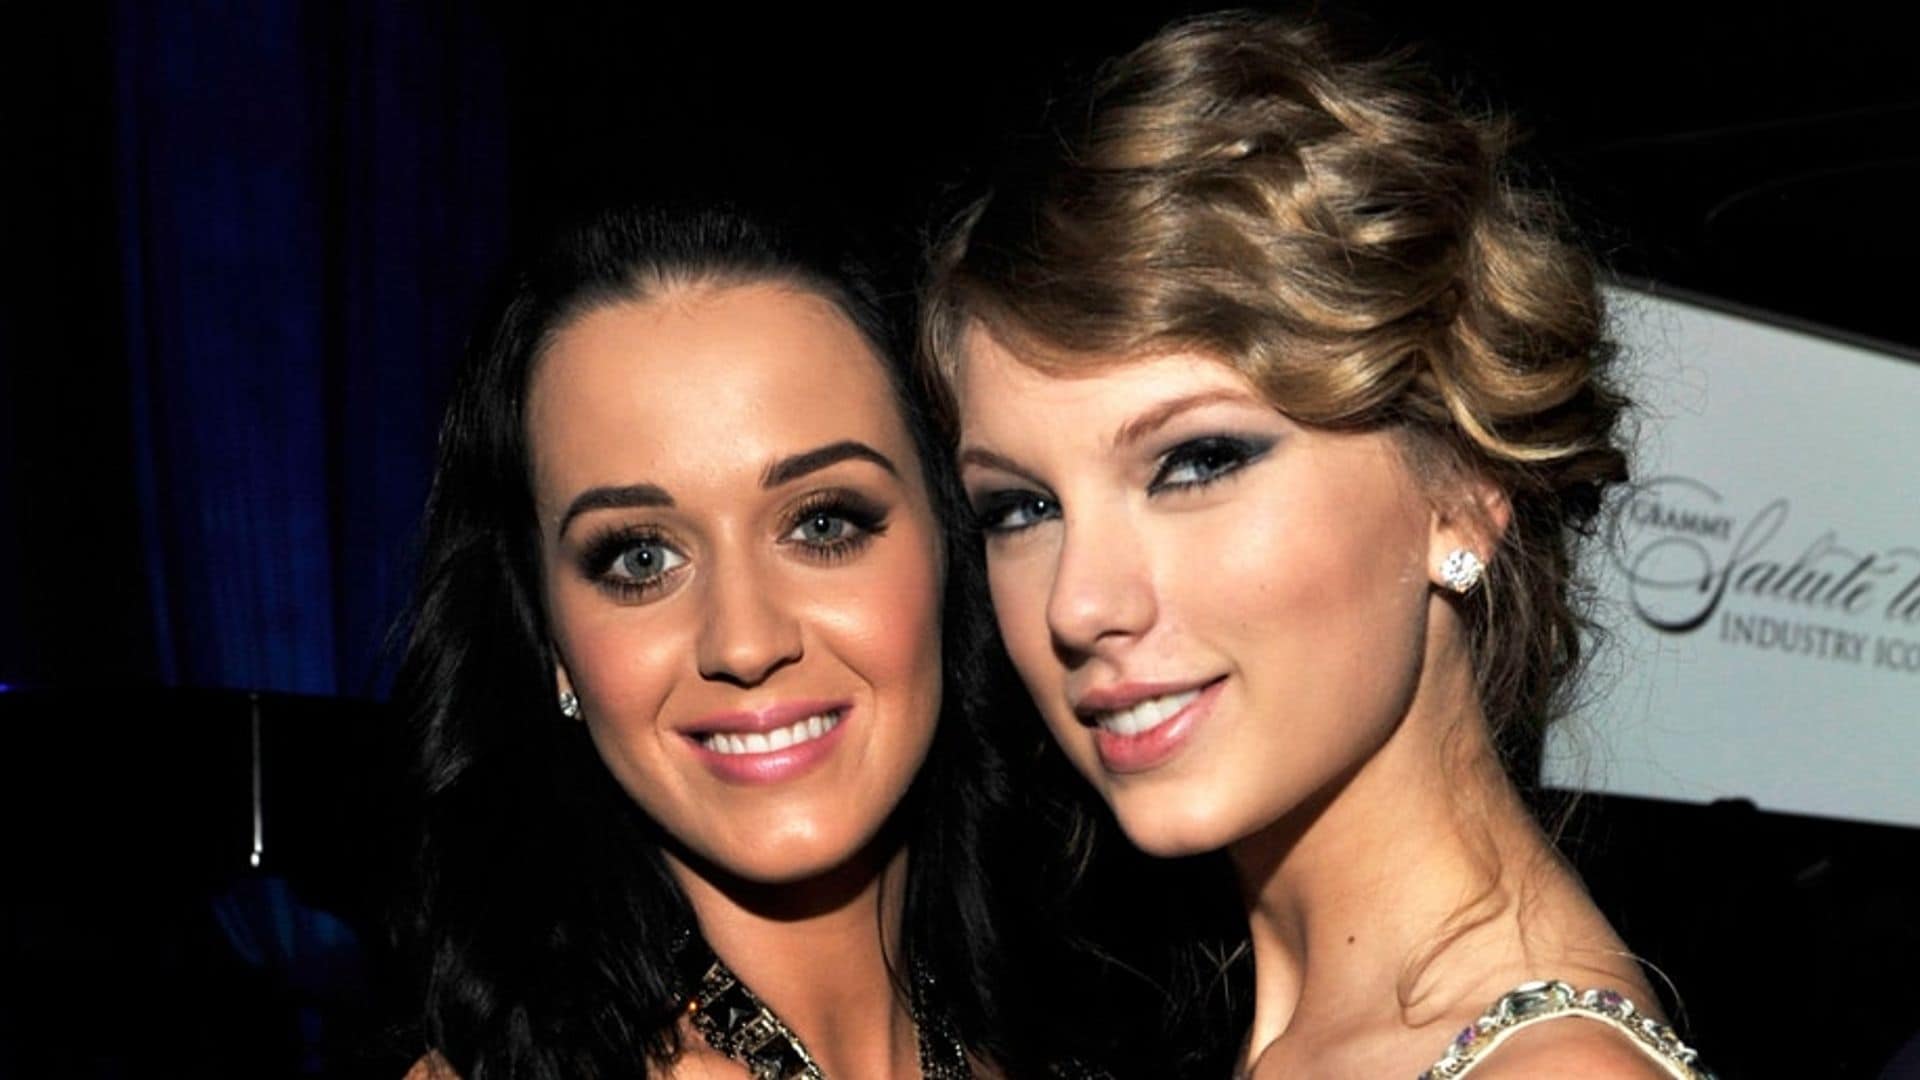 Katy Perry wants you to learn from her reconciliation with Taylor Swift